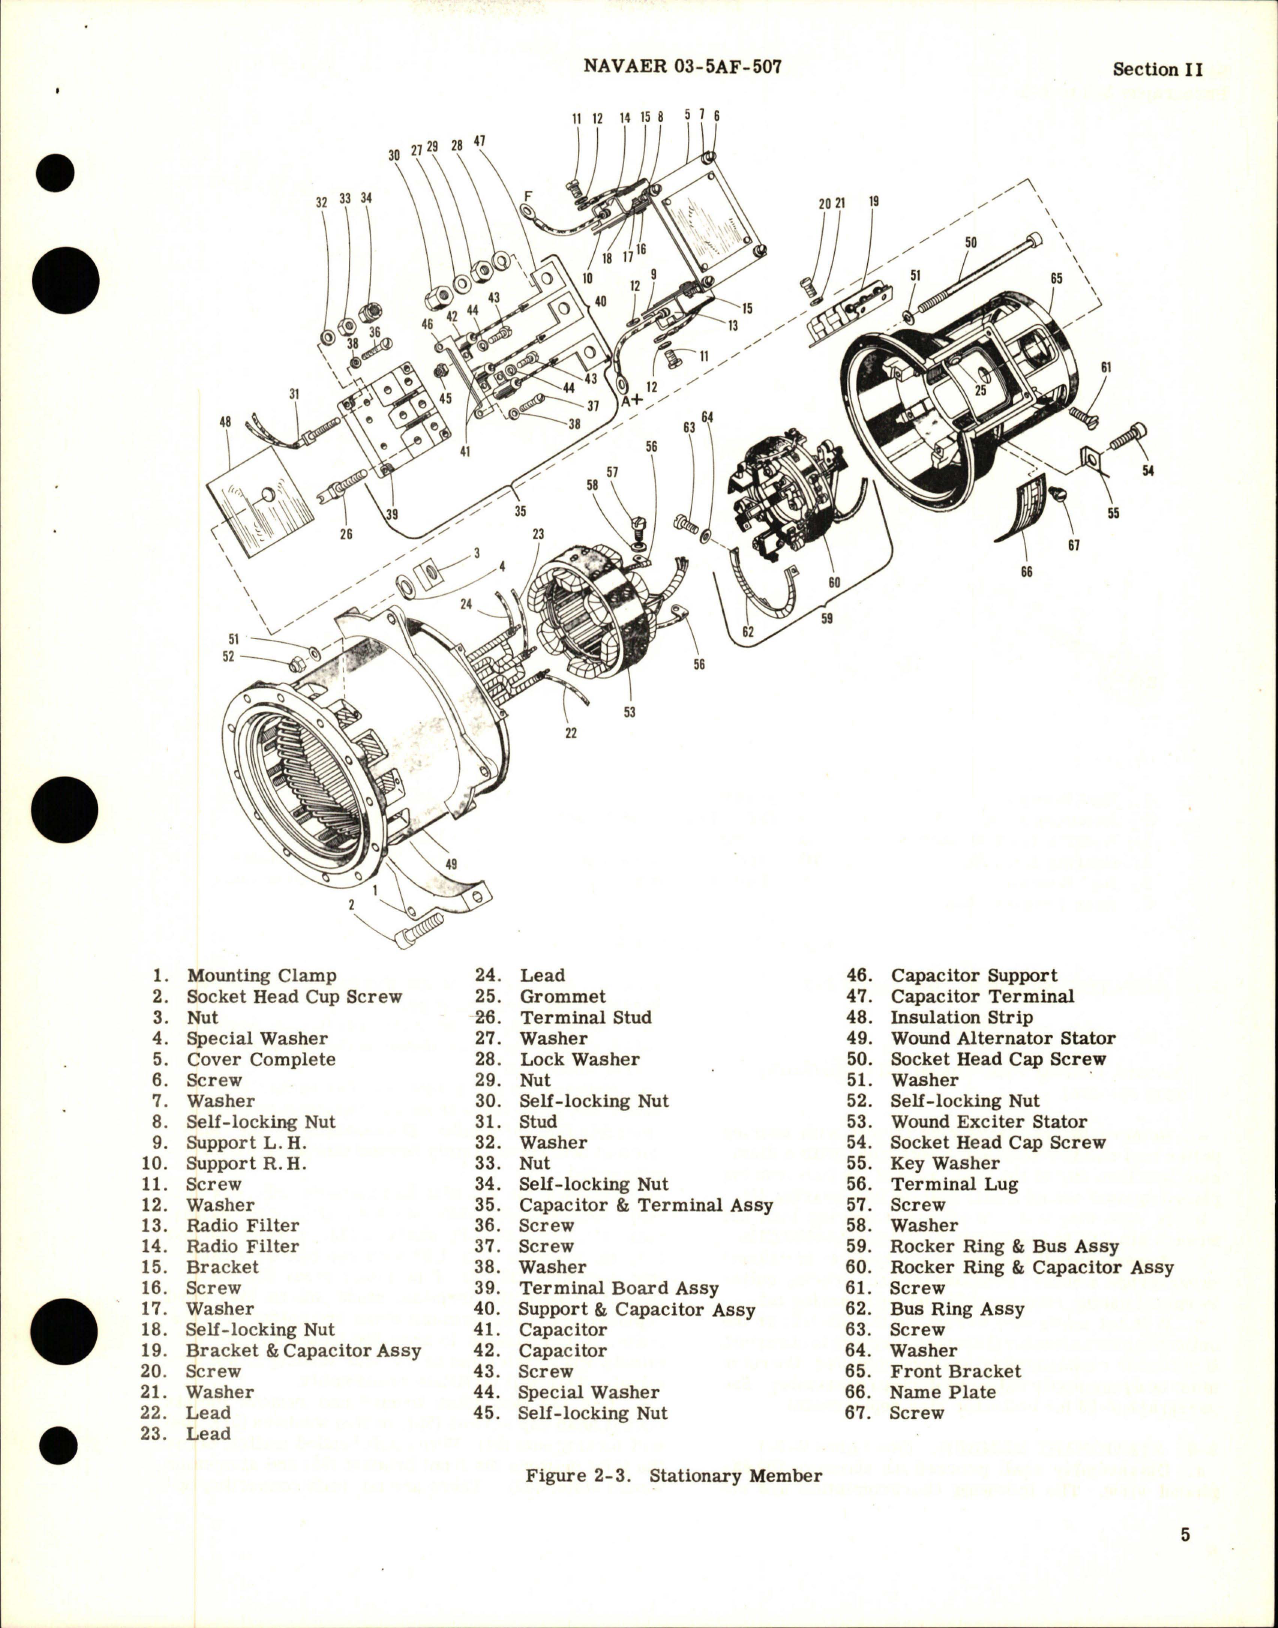 Sample page 7 from AirCorps Library document: Overhaul Instructions for AC Generator - Model A50J185-2 